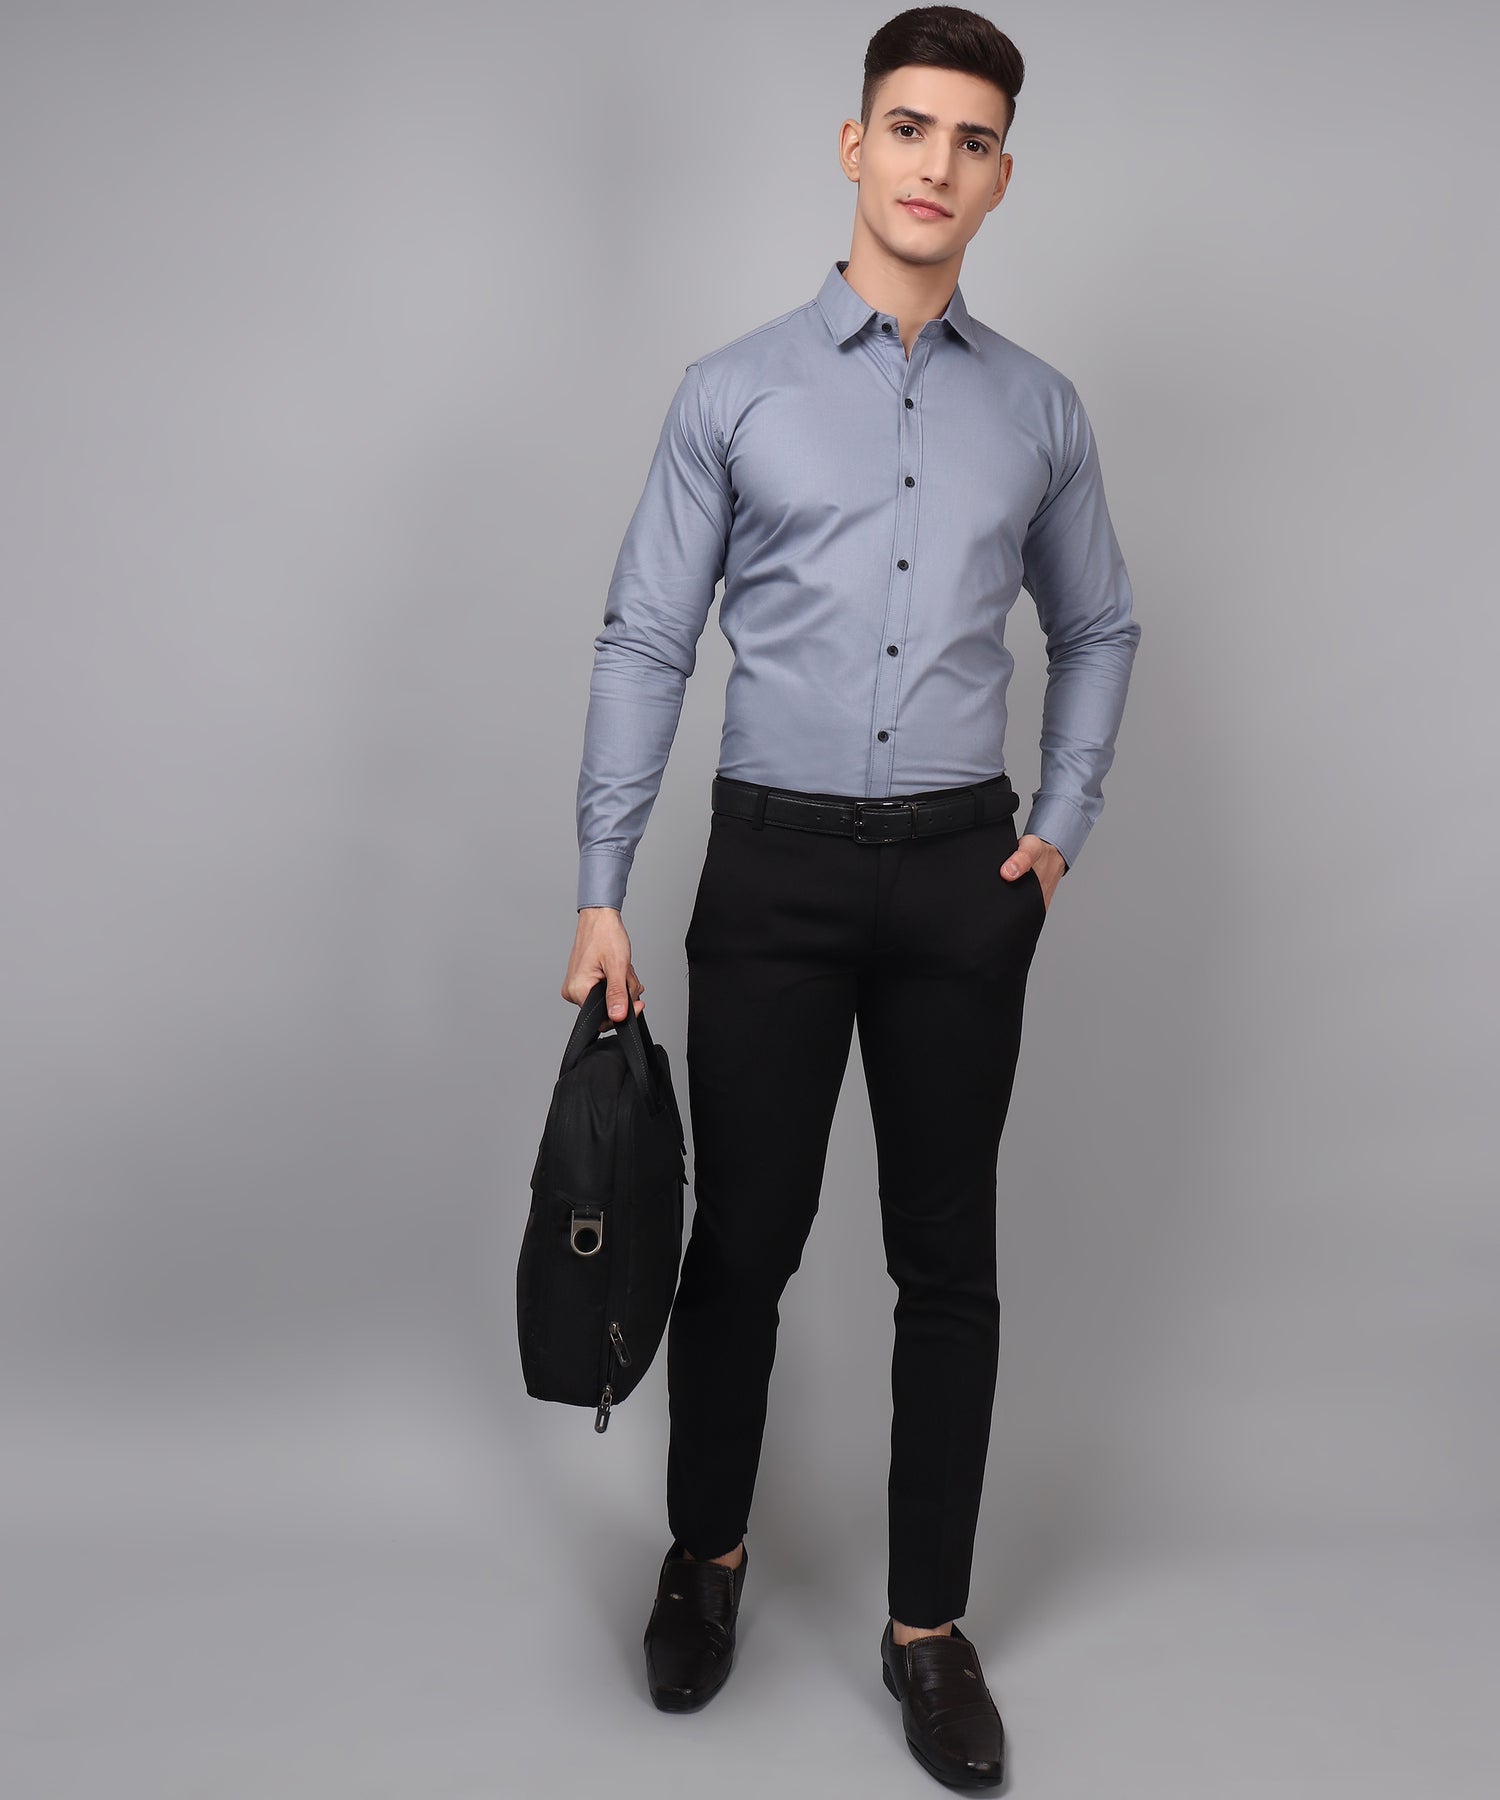 Guide to Selecting the Best Formal Shirts for Your Workspace